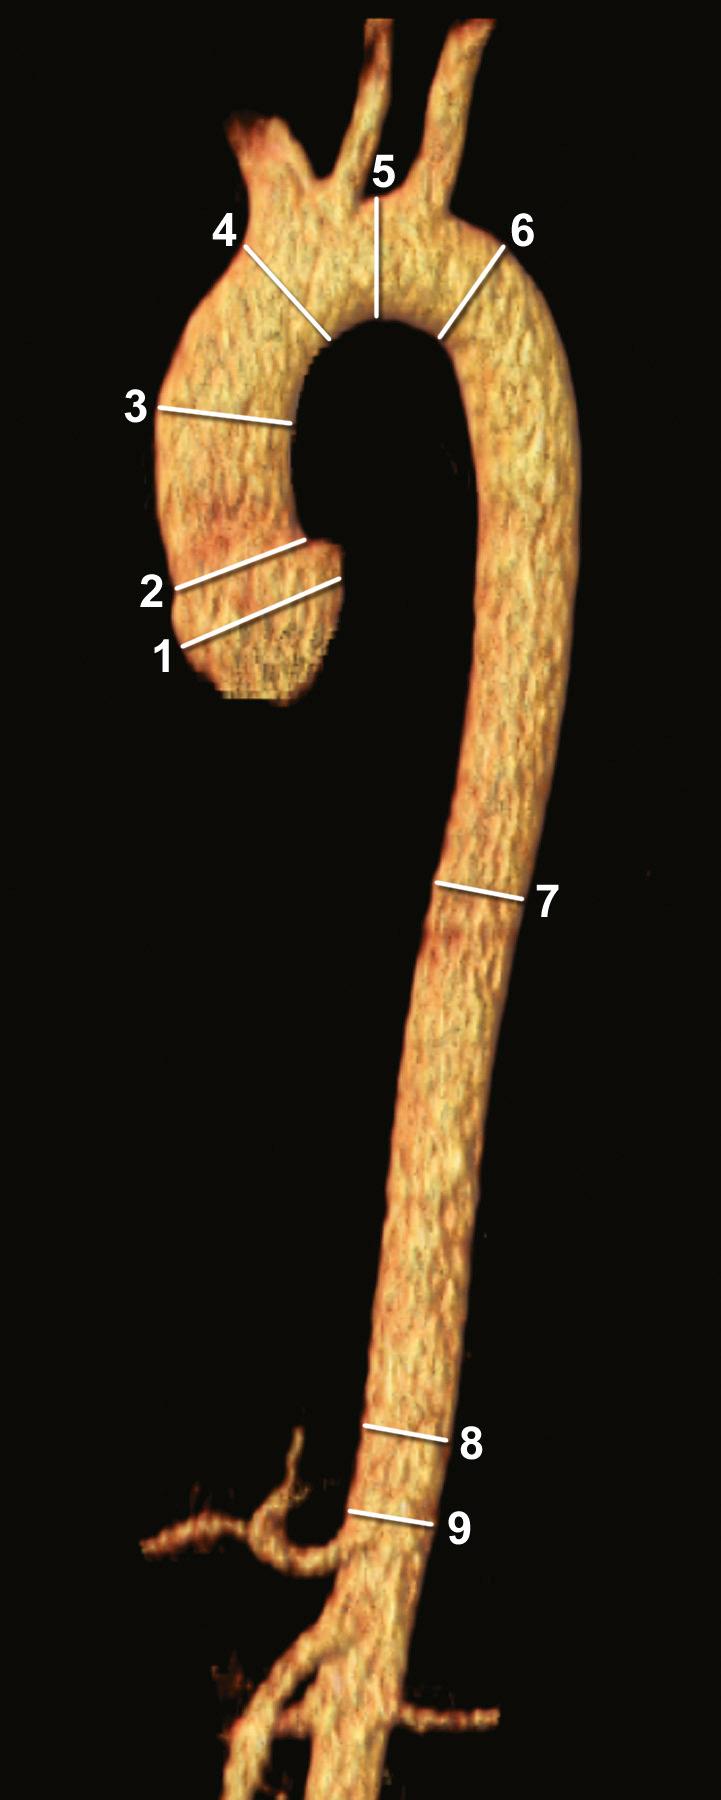 FIGURE 69-6, Current practice guidelines 43 seek to standardize the reporting of aortic diameters by indicating key anatomic locations to be measured. These include (1) the sinuses of Valsalva, (2) the sinotubular junction, (3) the mid-ascending aorta, (4) the proximal aortic arch at the origins of the innominate artery, (5) the mid-aortic arch, which is between the left common carotid and left subclavian arteries, (6) the proximal descending thoracic aorta, which begins at the isthmus (approximately 2 cm distal to the origins of the left subclavian artery), (7) the mid-descending thoracic artery, (8) the aorta at the diaphragm, and (9) the abdominal aorta at the origins of the celiac axis.